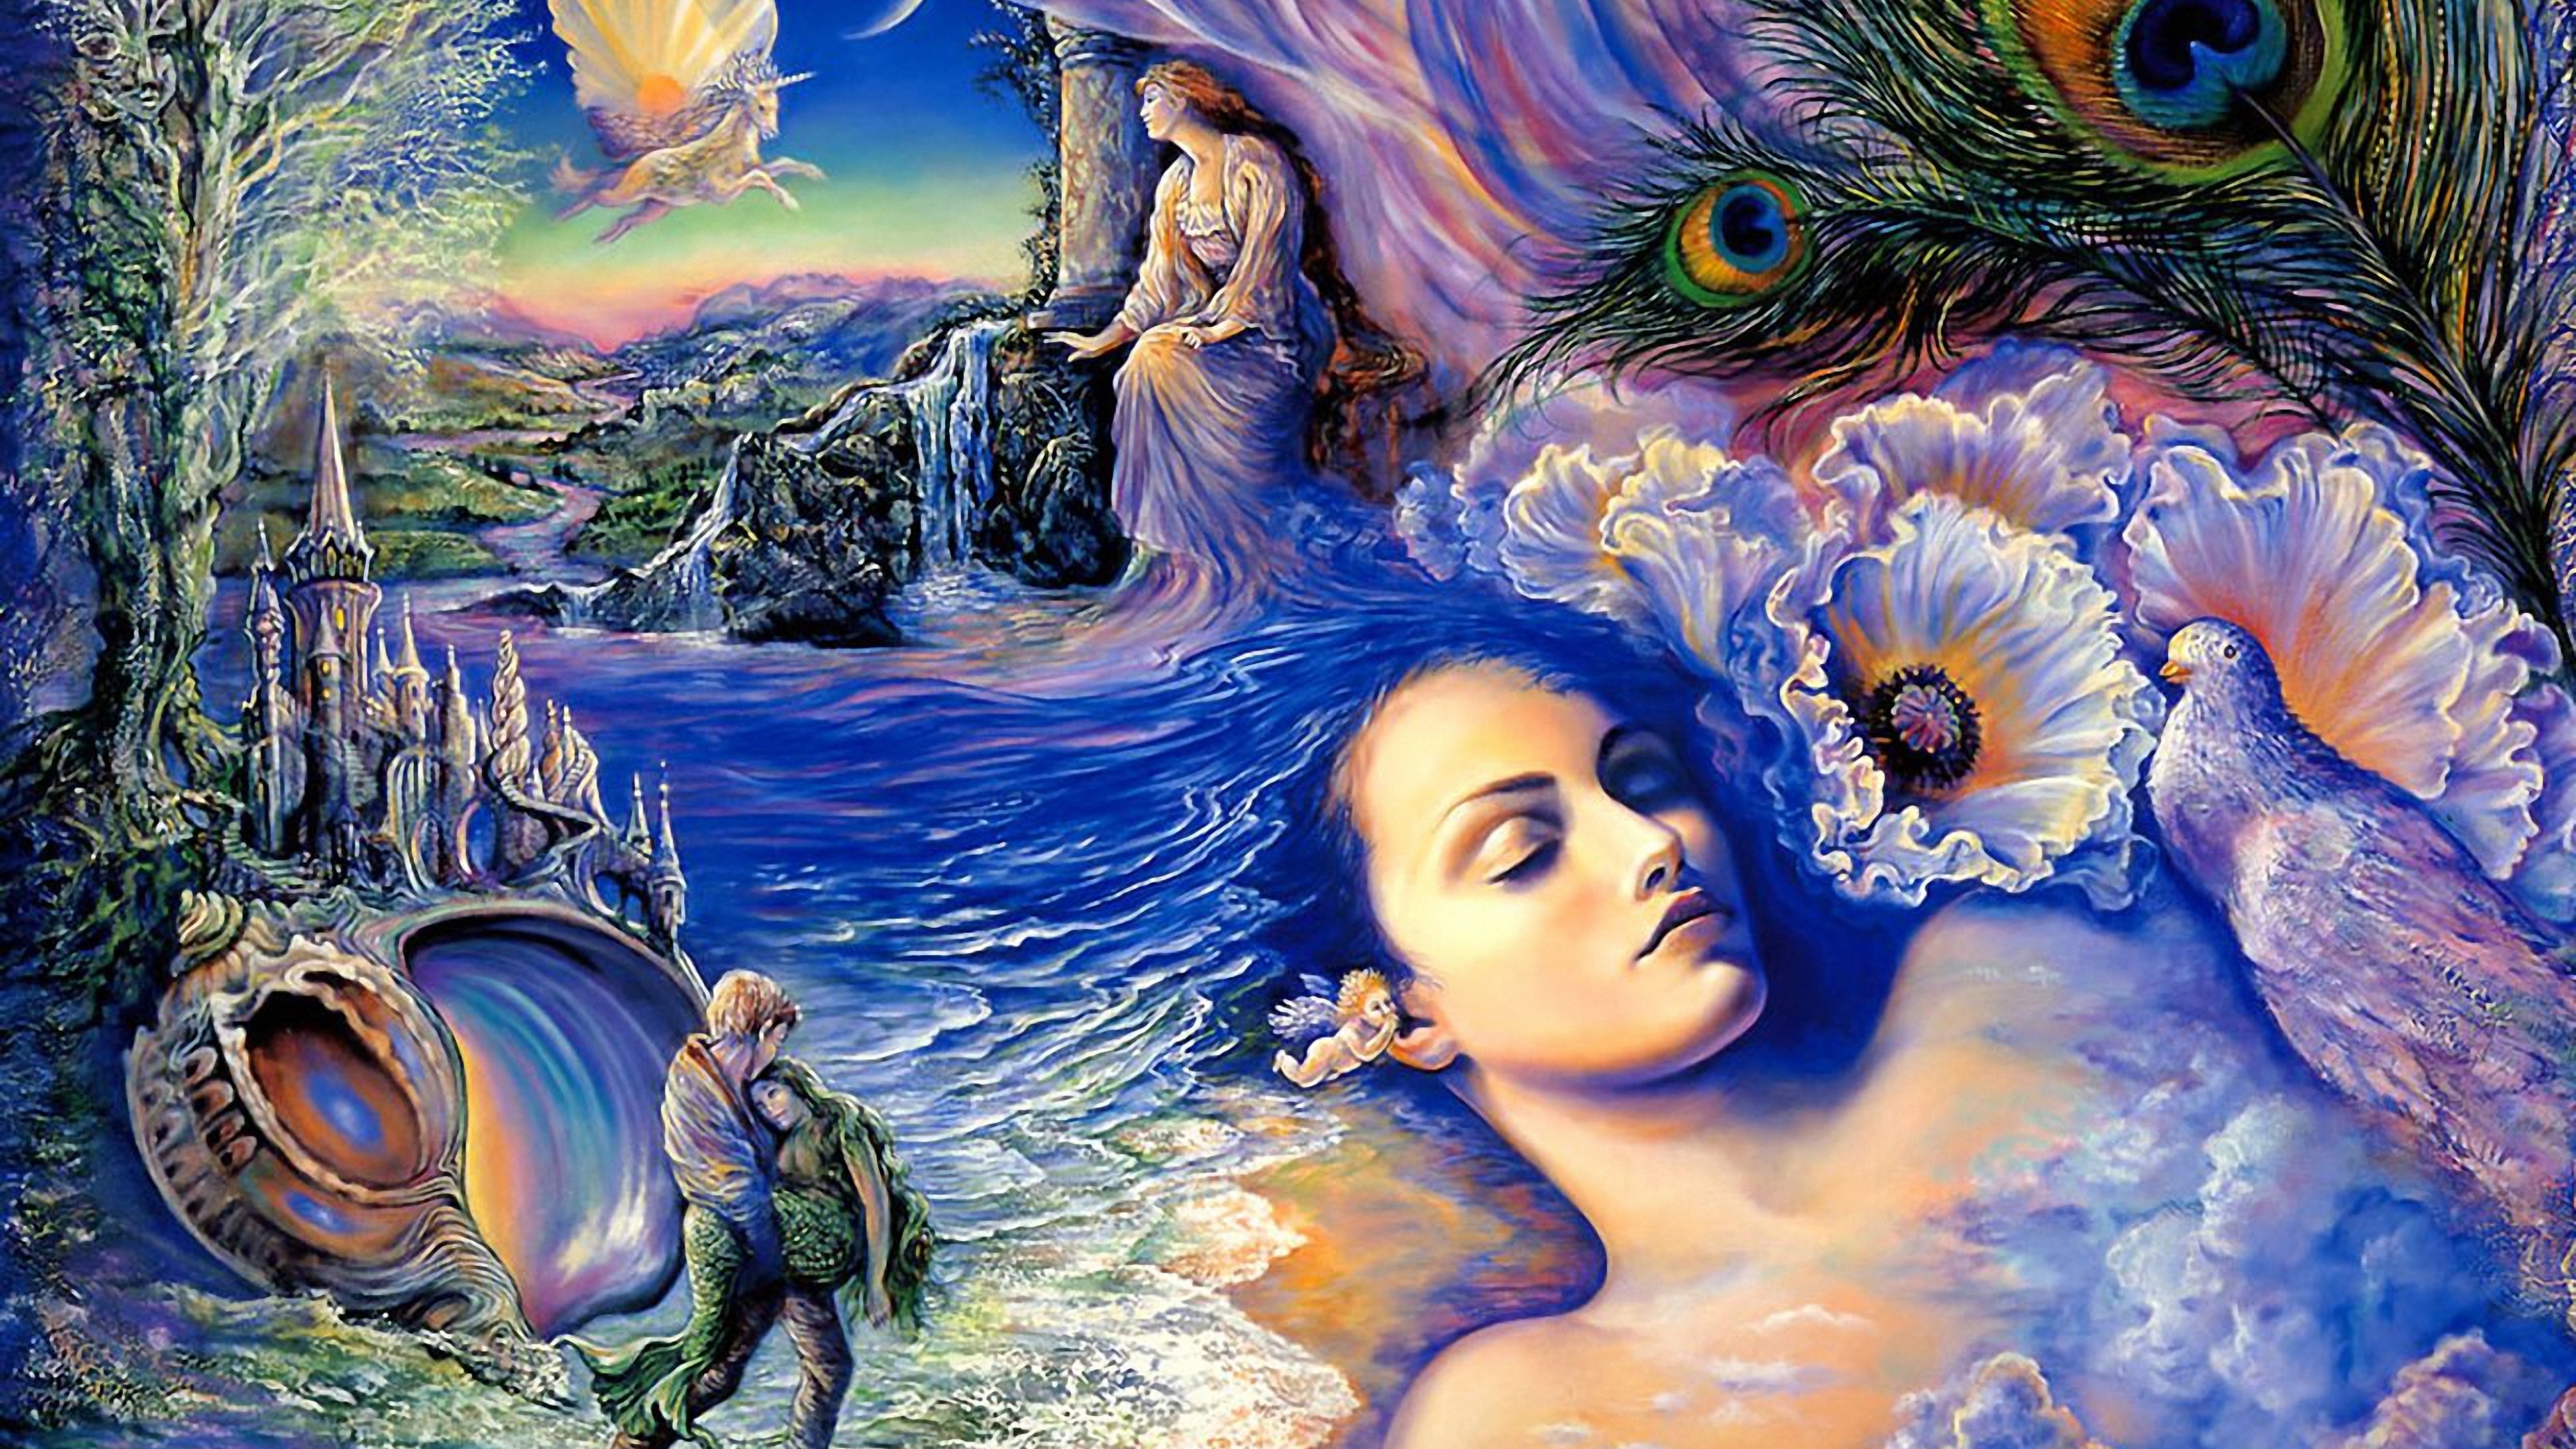 Josephine Wall, Ethereal beauty, Mystical realms, Whimsical scenes, 3840x2160 4K Desktop